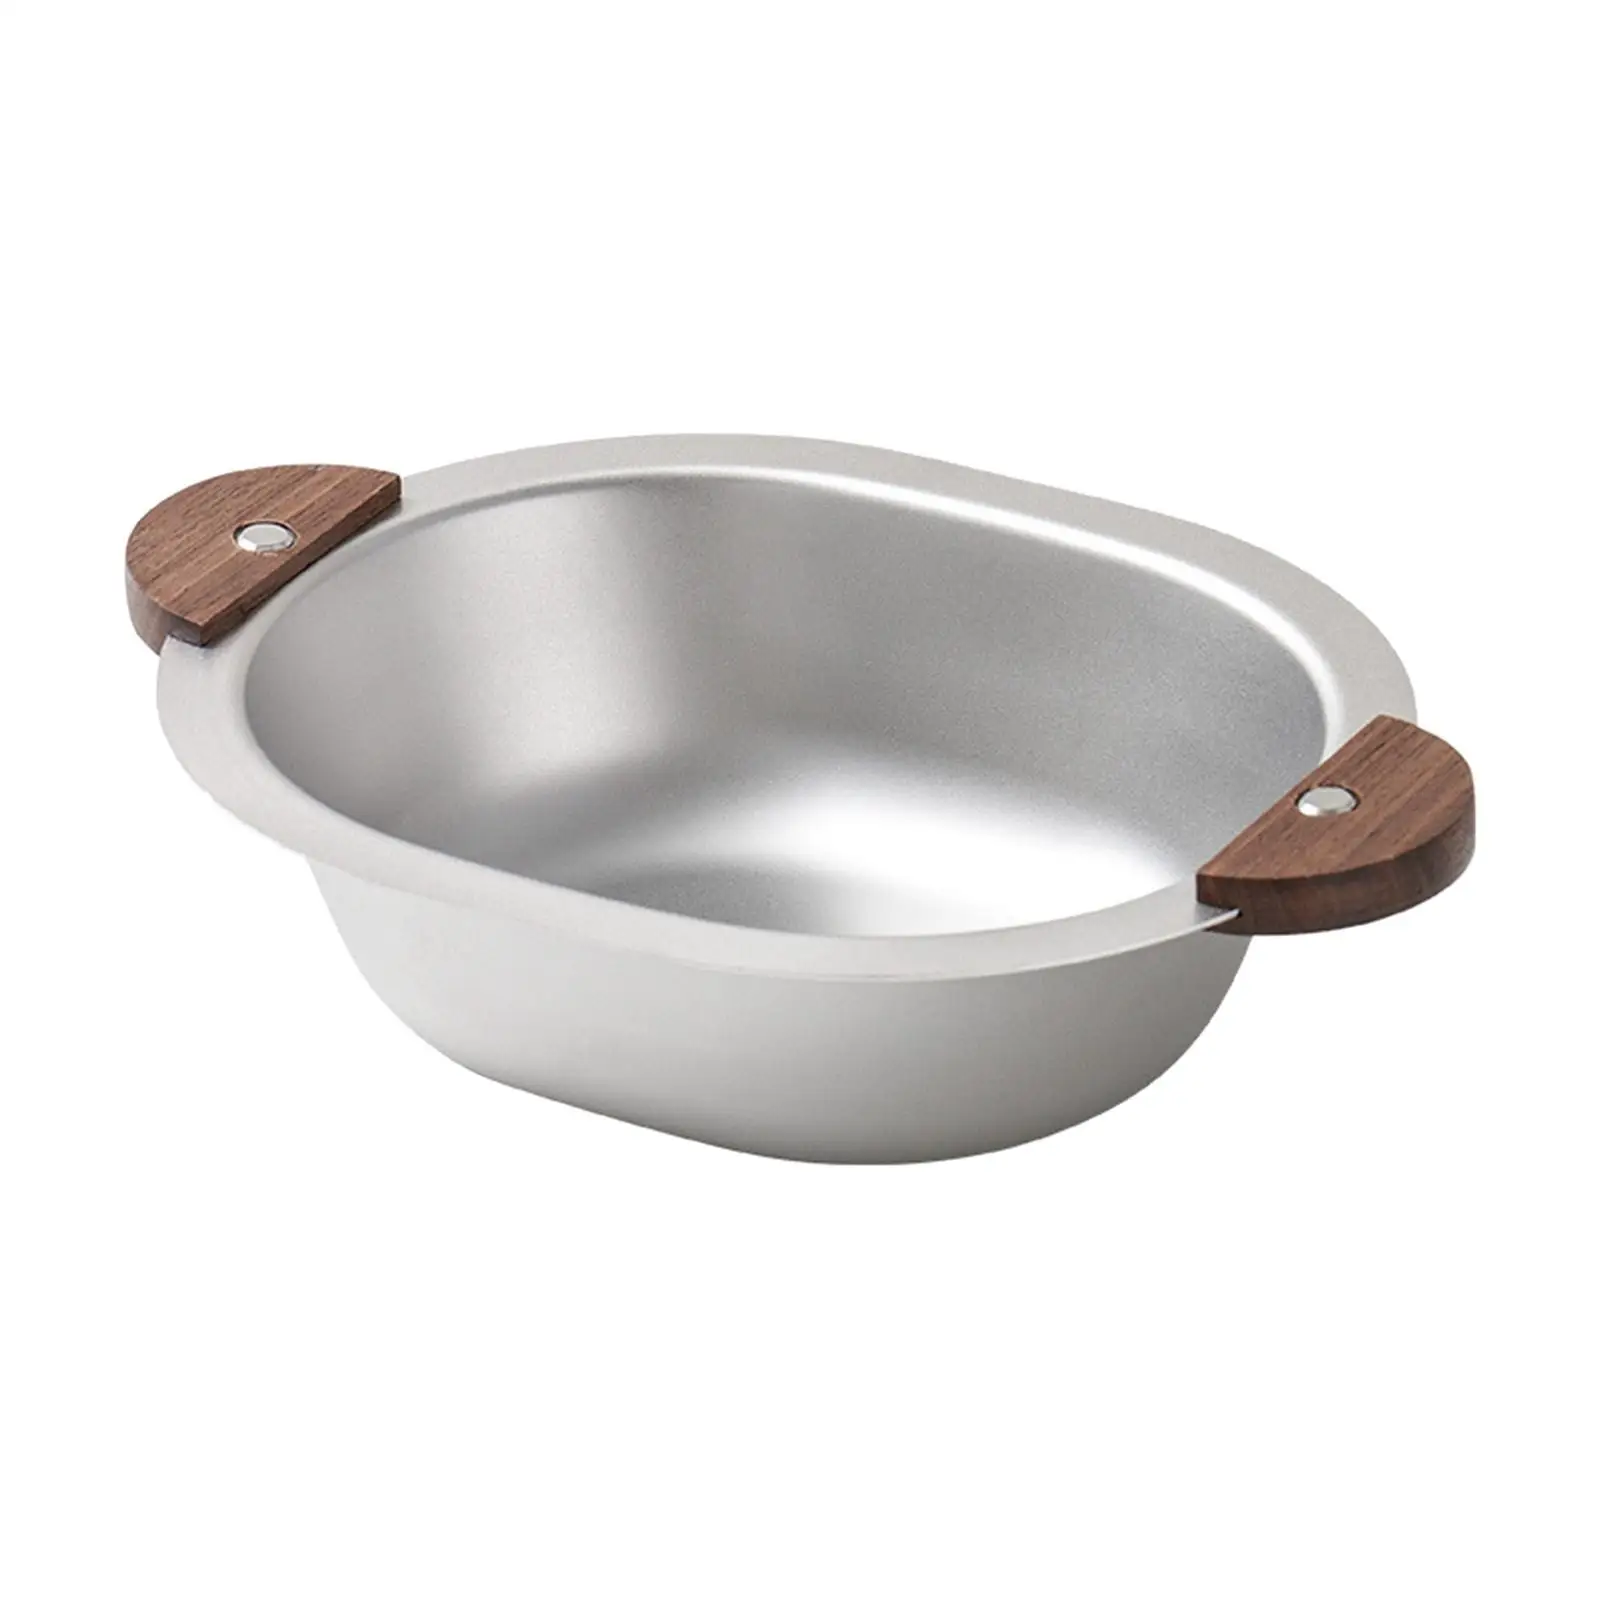 500ml Stainless Steel Bowl Kitchen Accessory Space Saving with Wooden handle Dish Bowl Salad Bowls for Food Dessert Rice Fruit